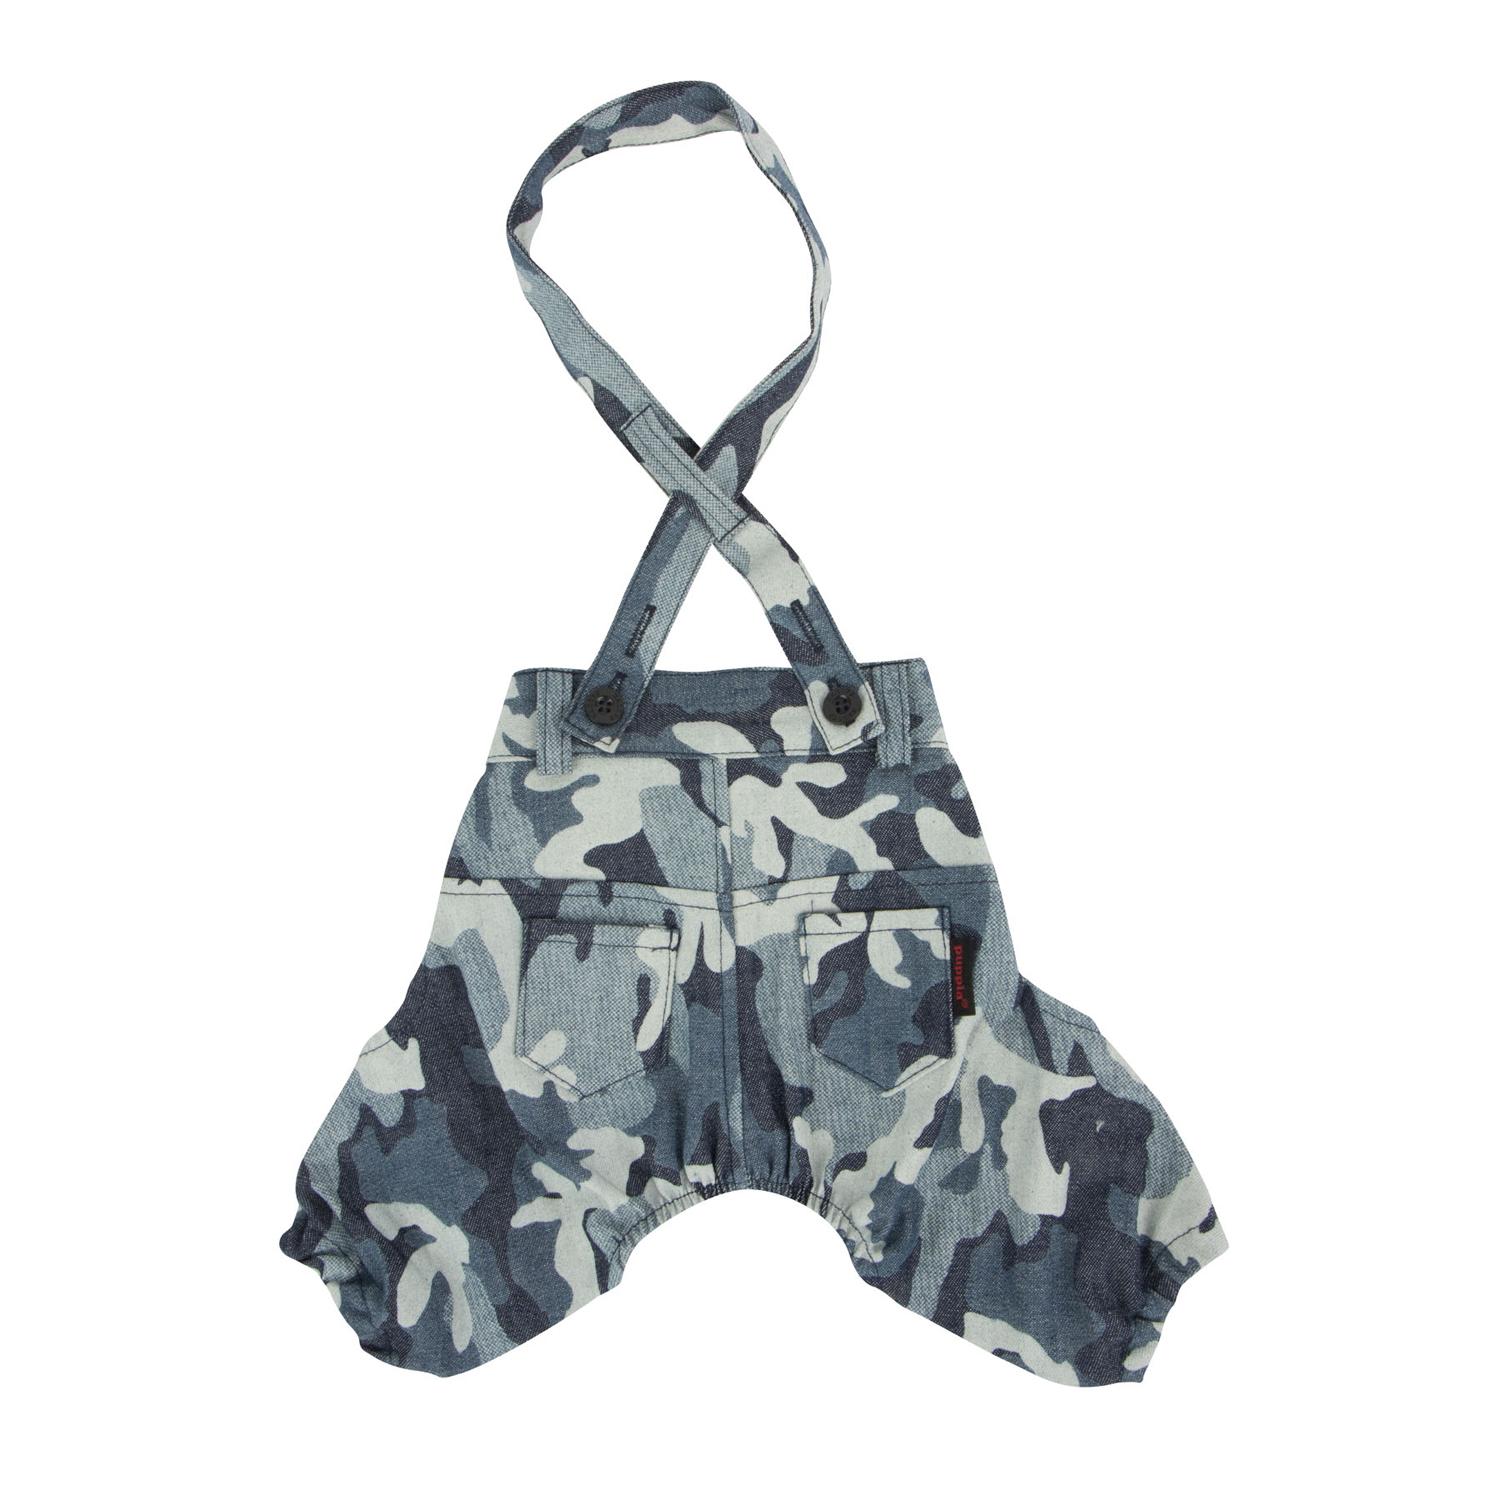 Bobby Dog Suspender Pants by Puppia - Navy Camo